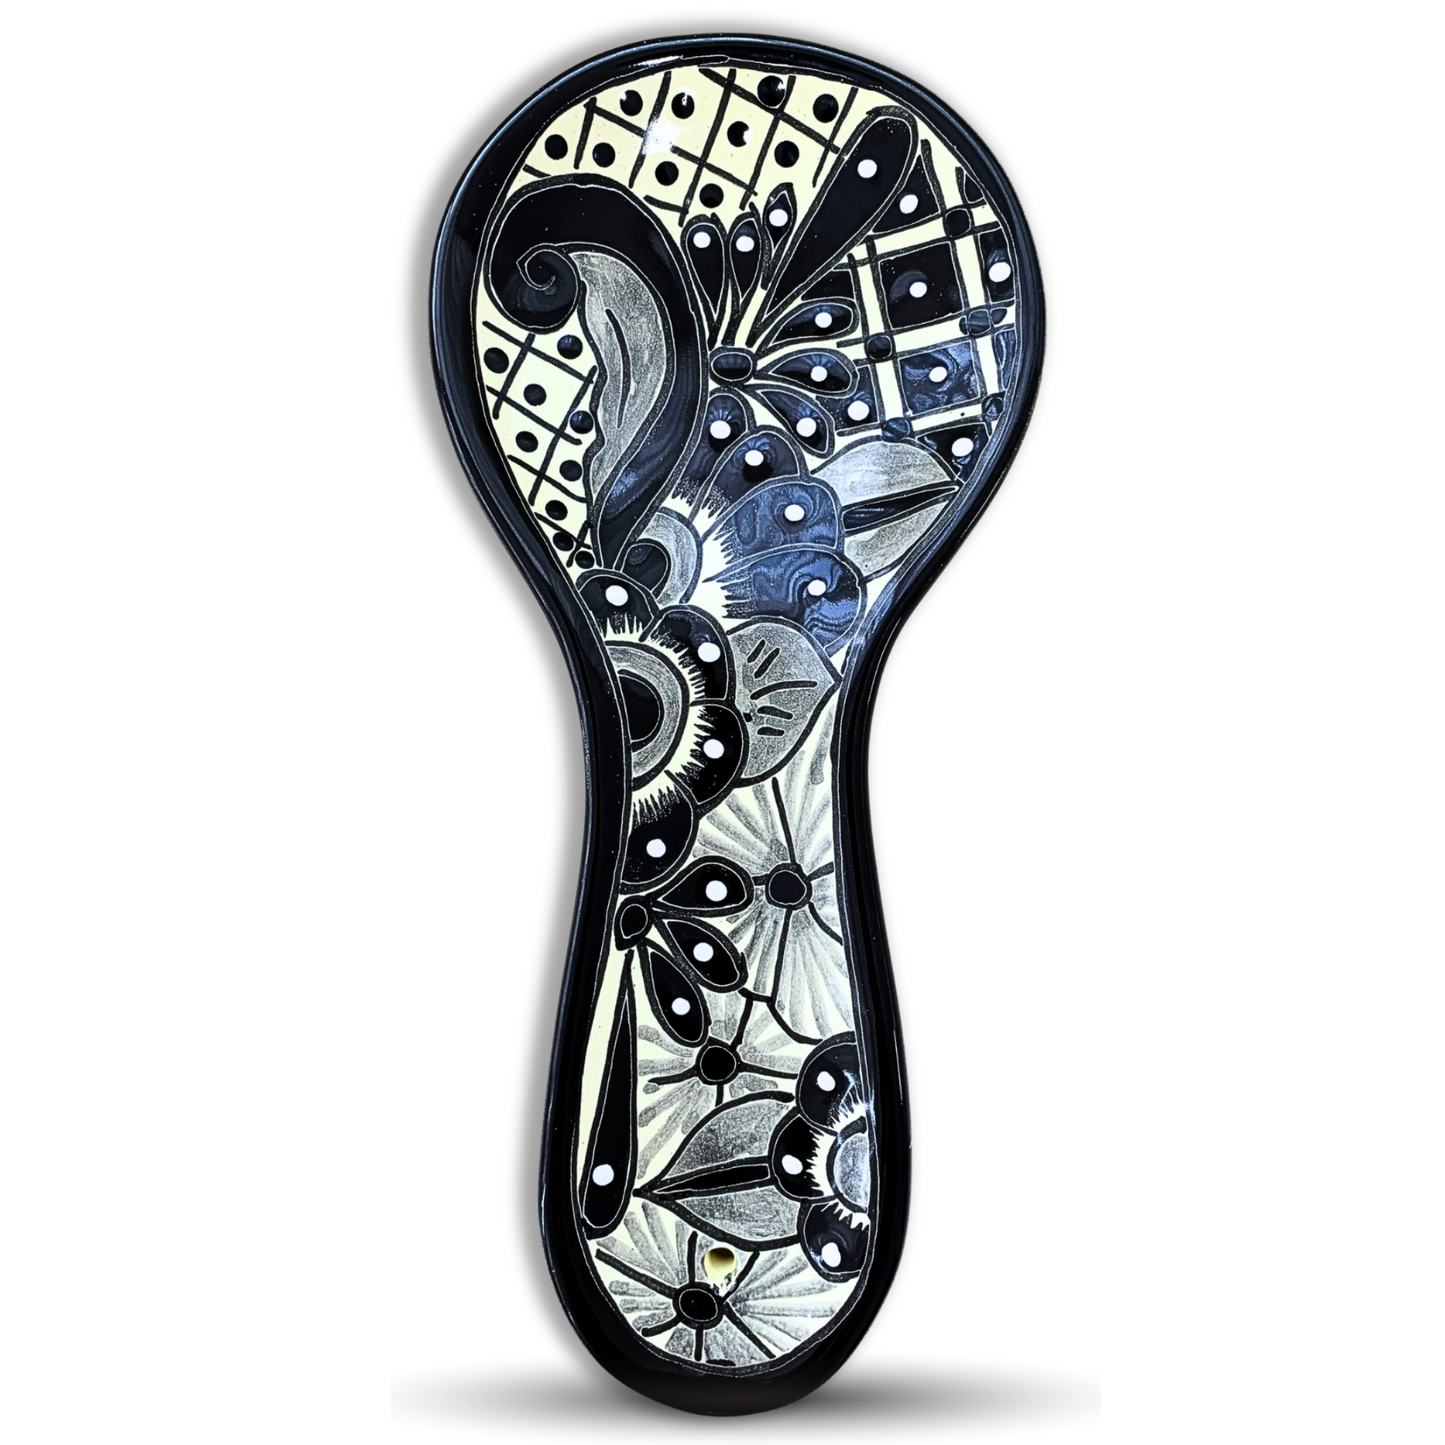 Hand Painted Talavera Ceramic Spoon Rest, a Black and White Floral Blanco/Negro design for kitchen décor, made by Mexican artisans.